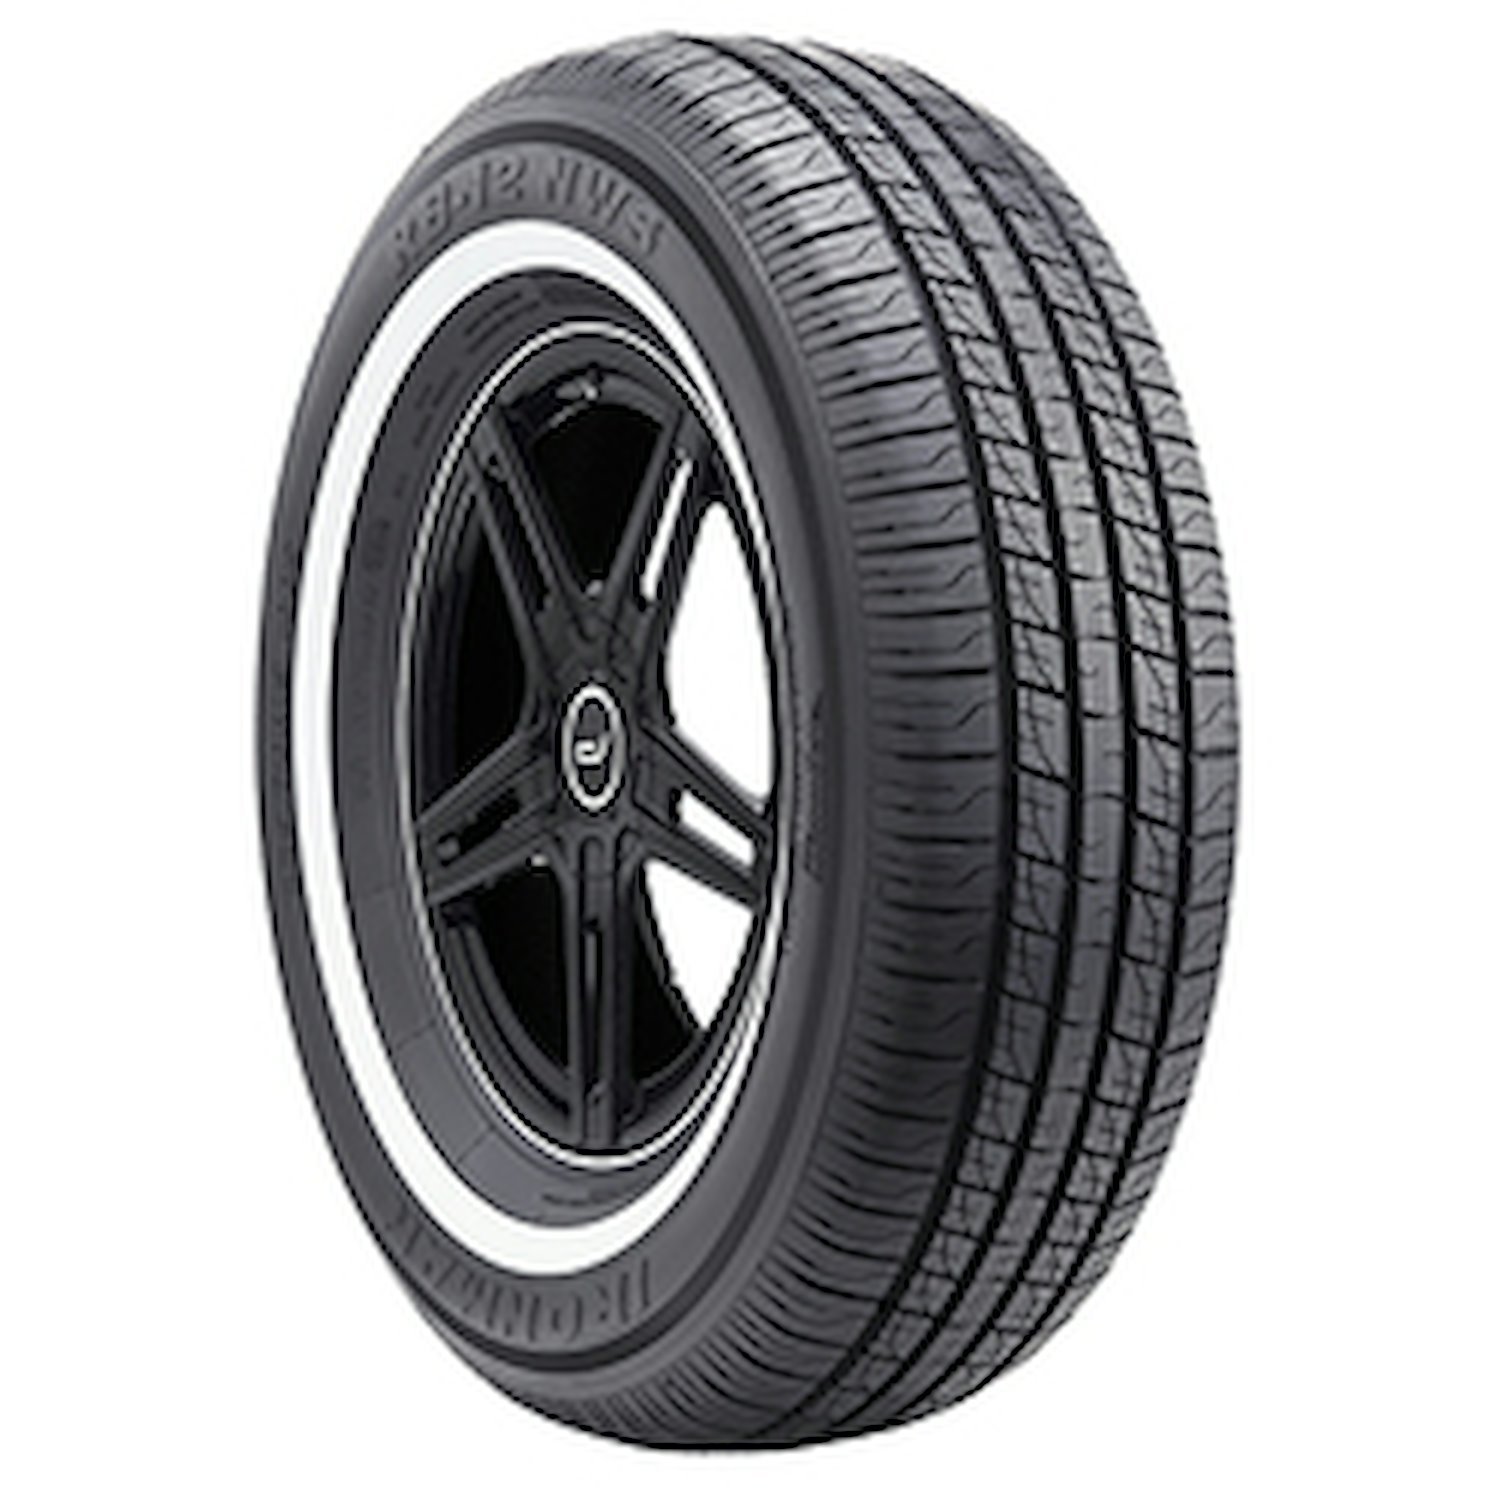 RB-12 NWS Tire, 195/75R14 92S